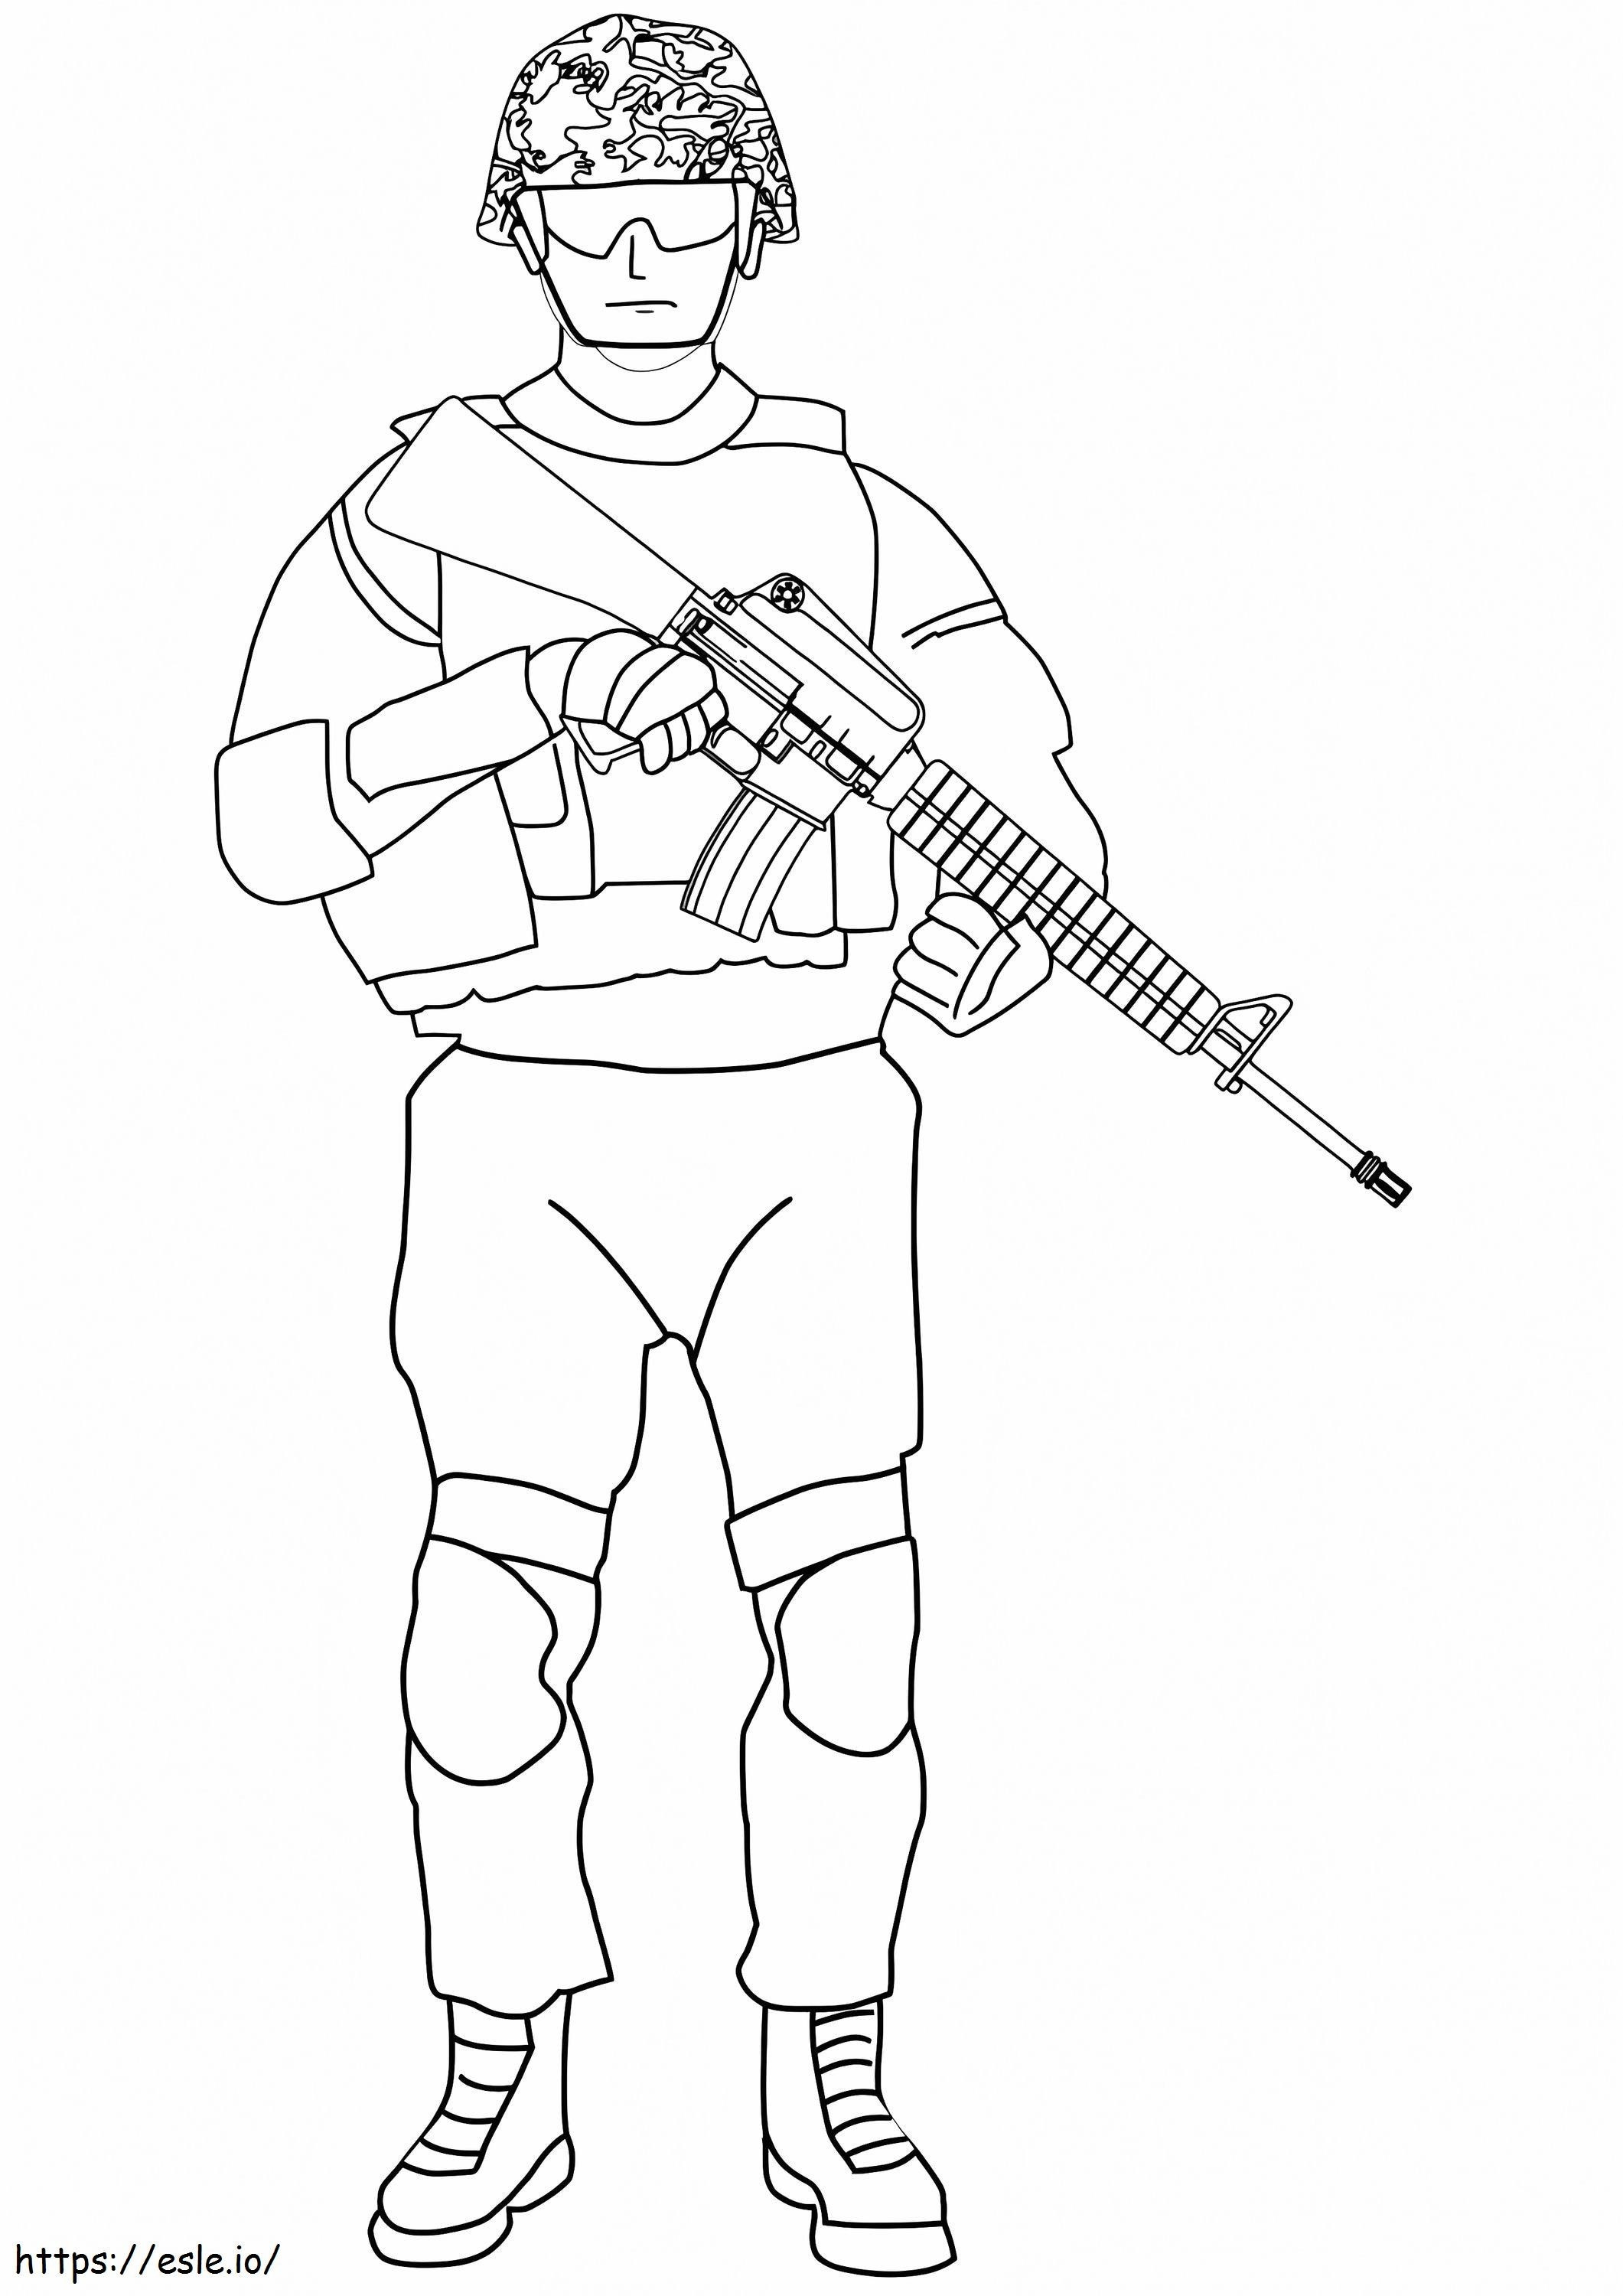 Coloriage  Army Guy Army Men Pictures Ready To Shot Best Soldier Page Printable Images Adult Army Man Coloring Sheets à imprimer dessin